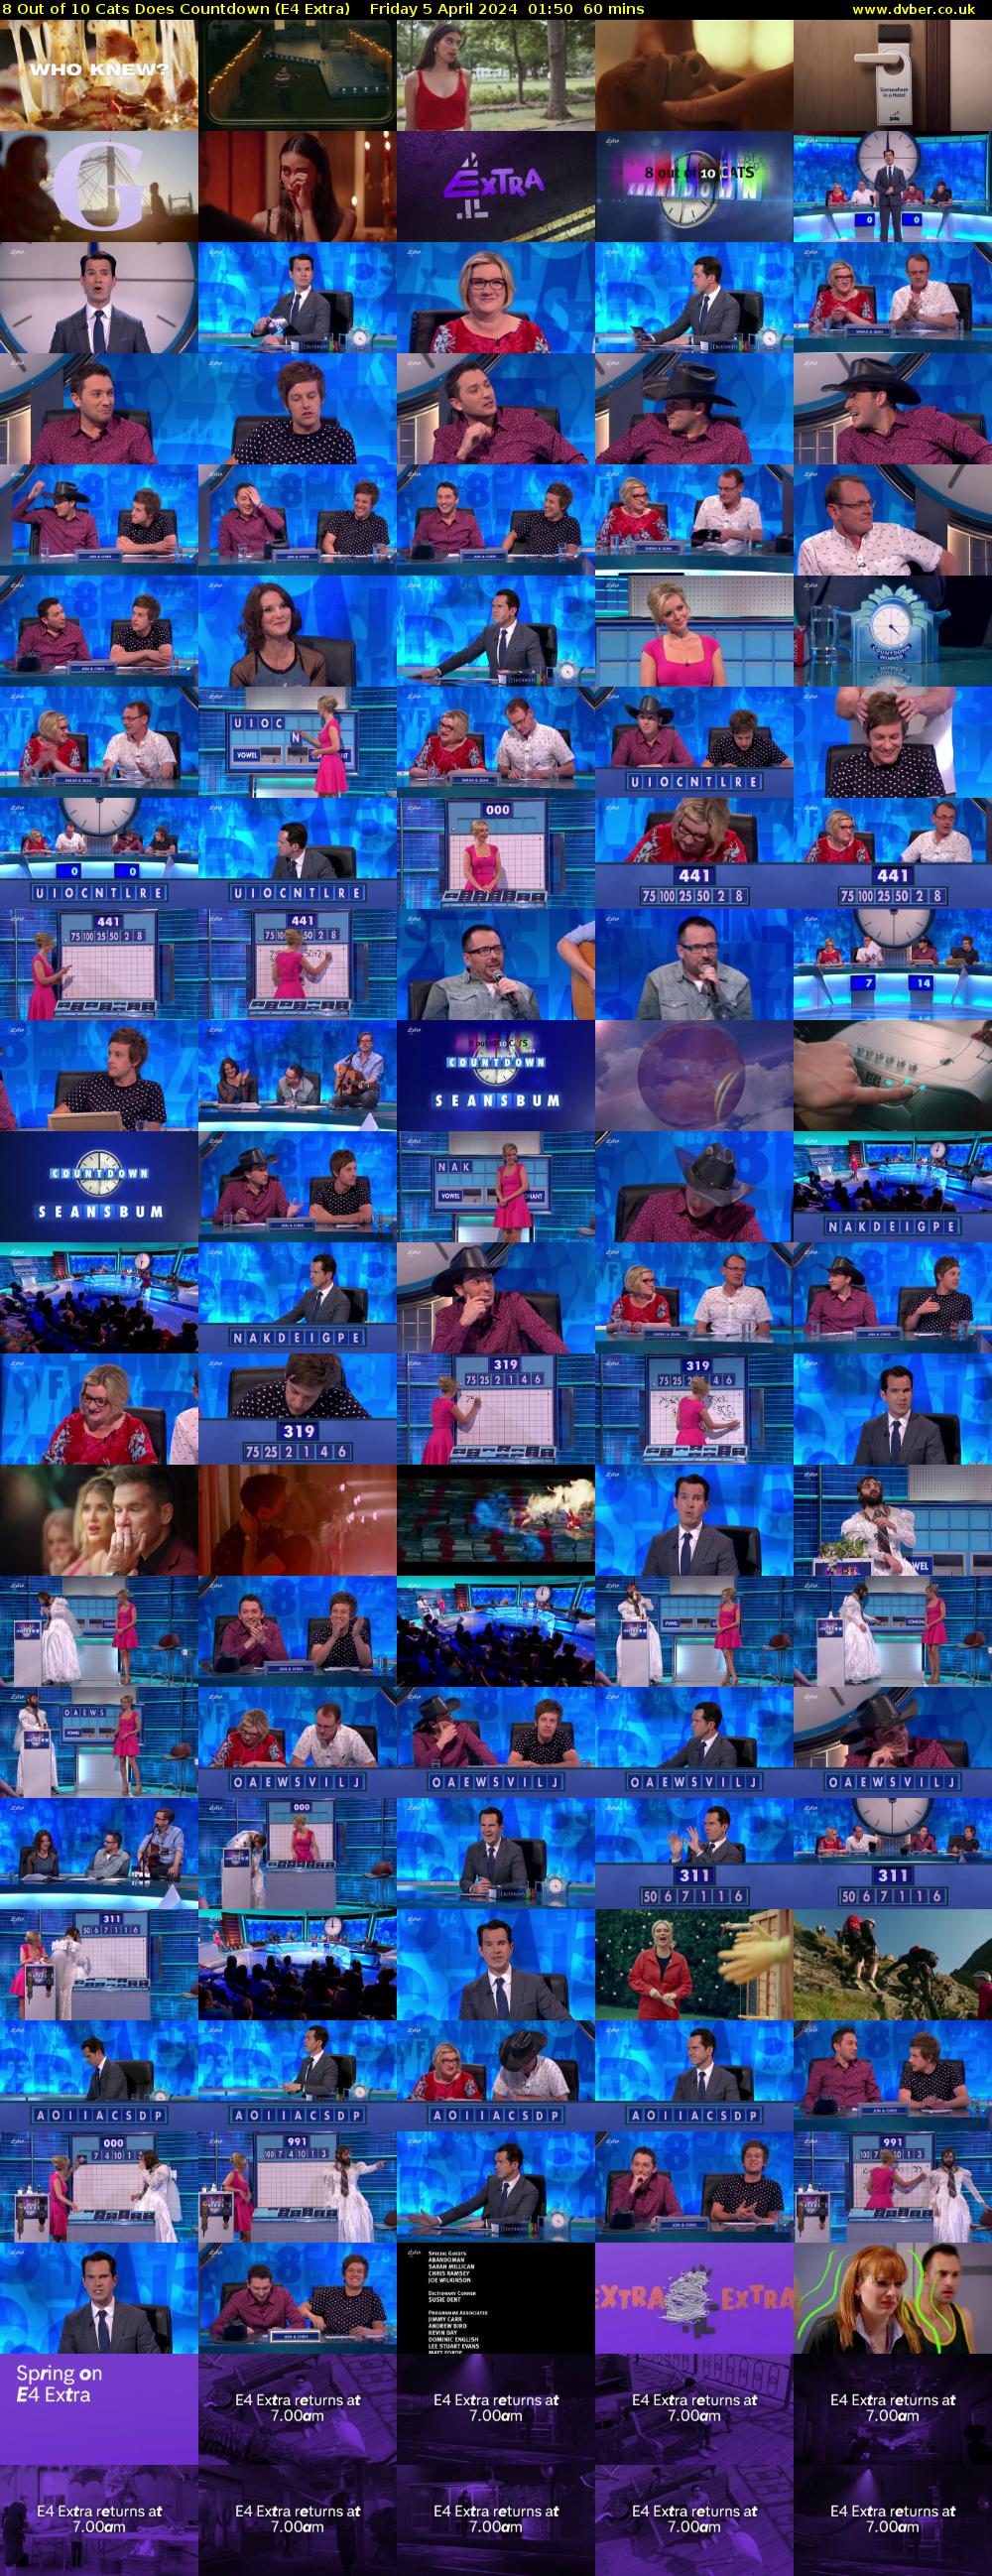 8 Out of 10 Cats Does Countdown (E4 Extra) Friday 5 April 2024 01:50 - 02:50